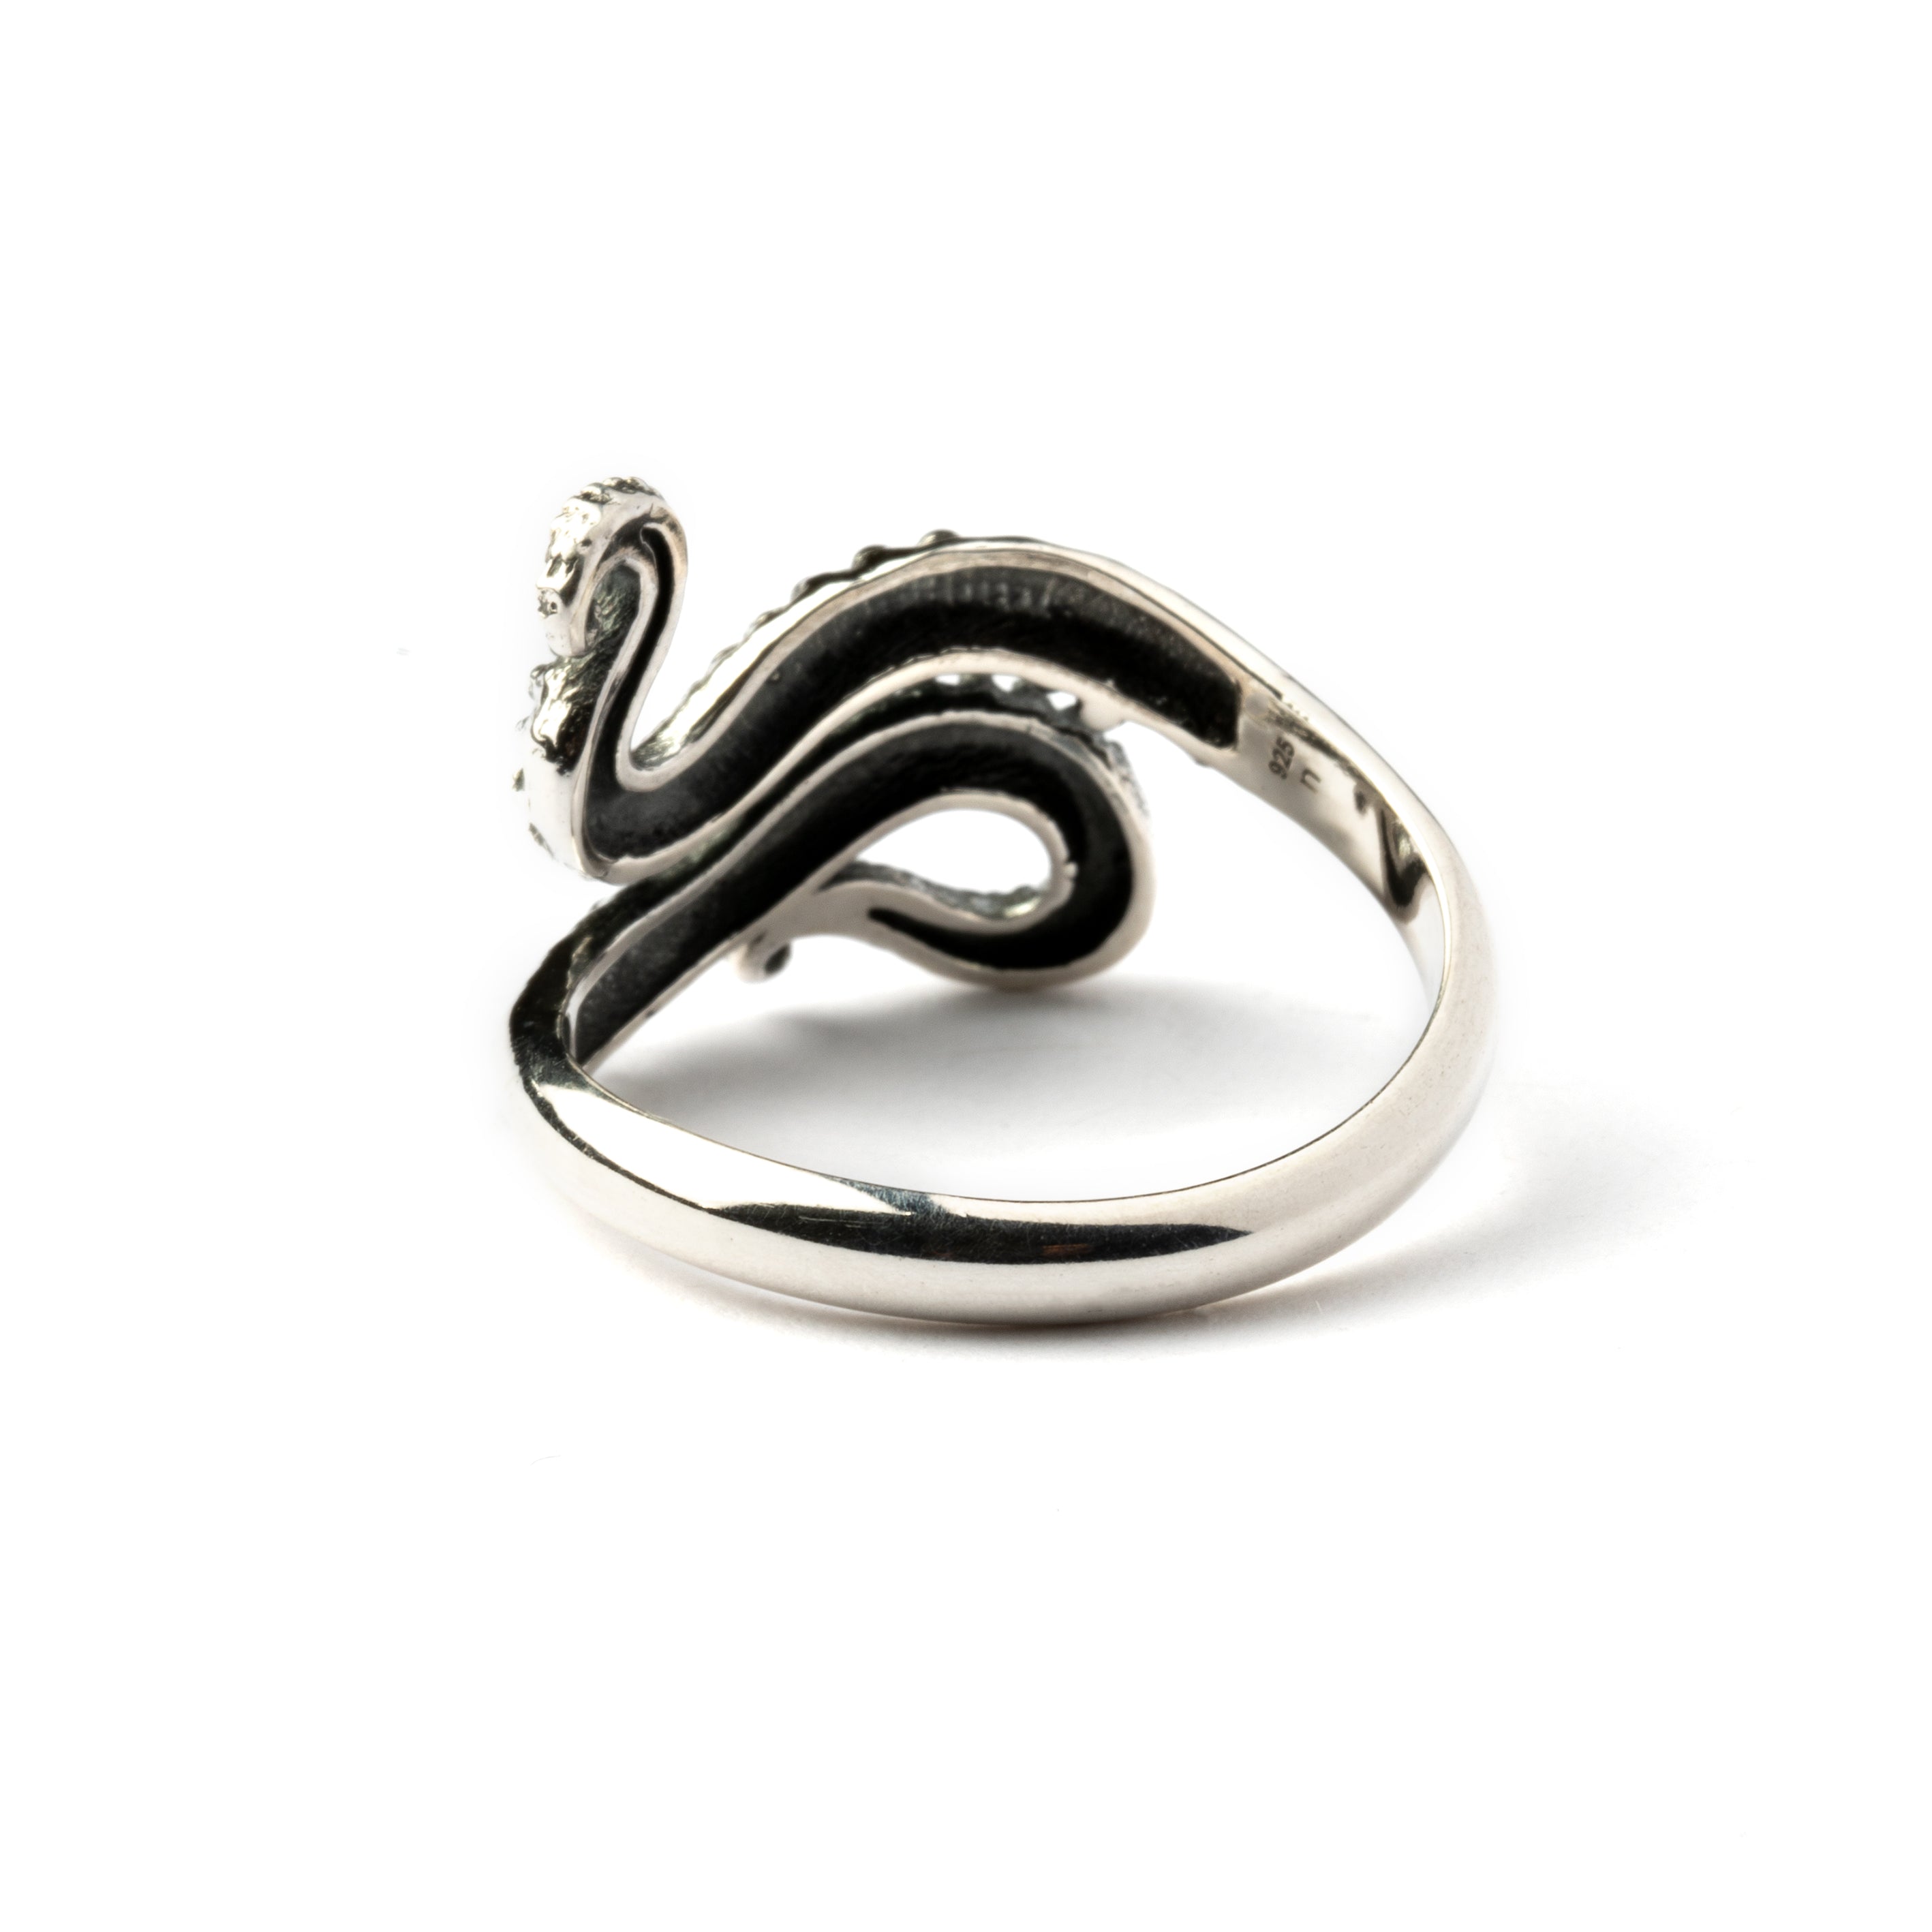 Silver octopus tentacle ring back side view